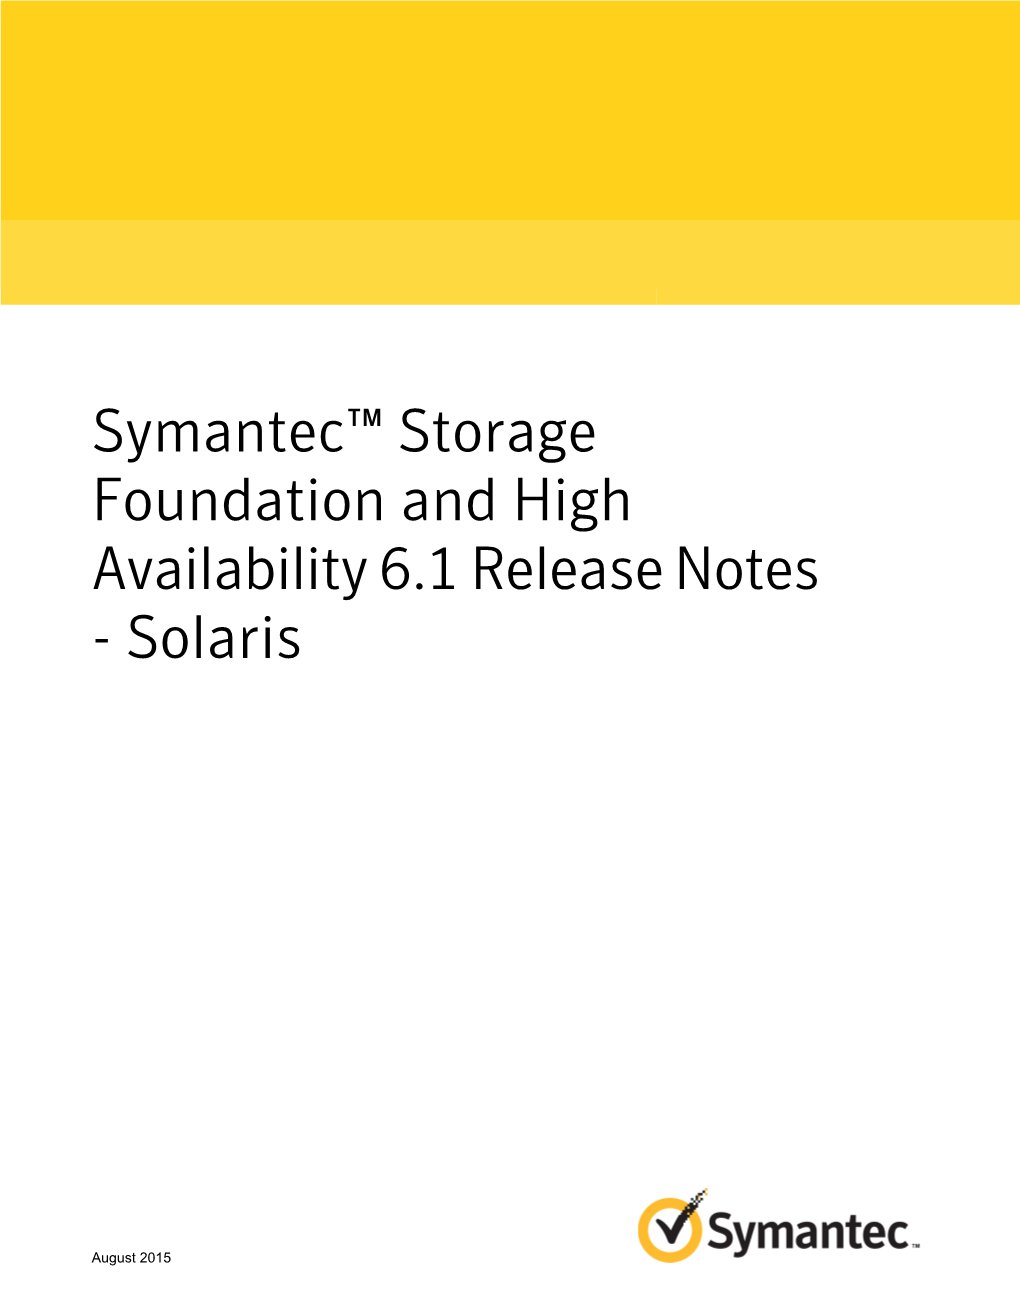 Symantec™ Storage Foundation and High Availability 6.1 Release Notes - Solaris